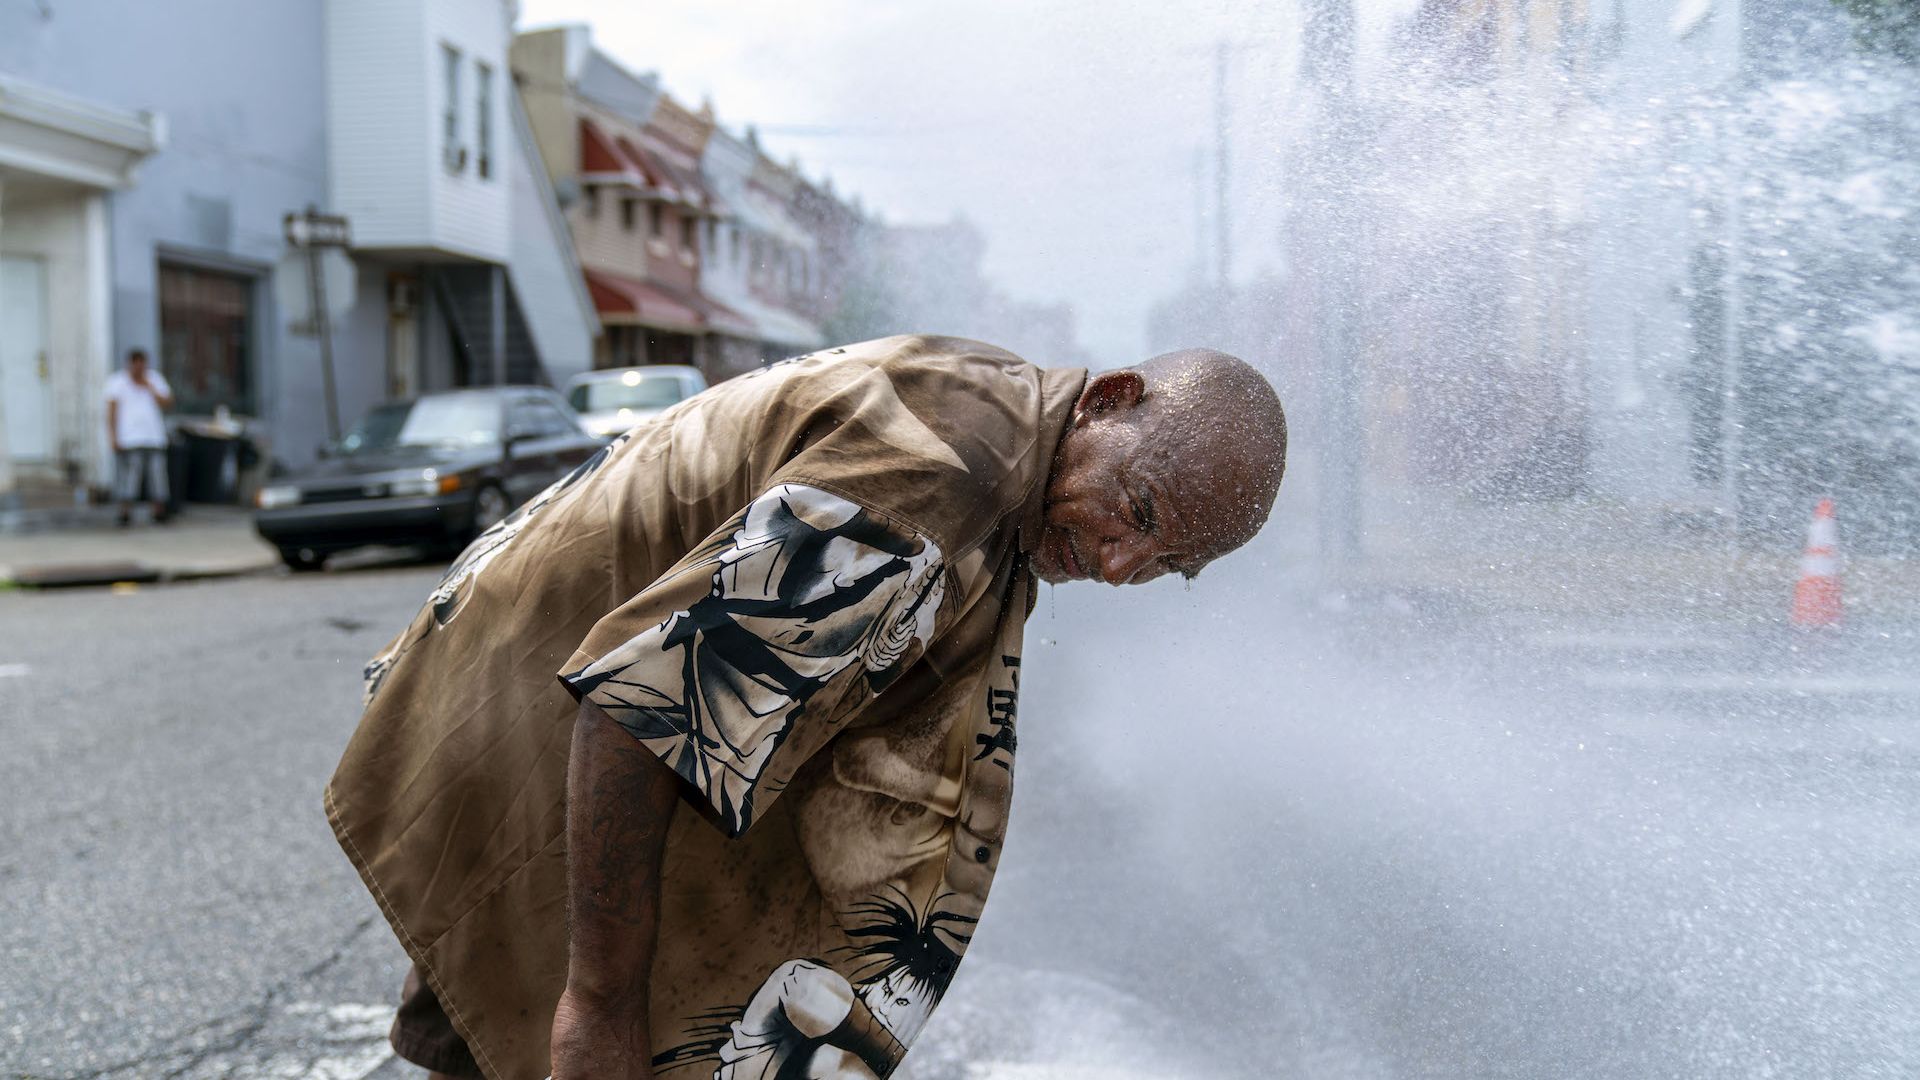 Eduardo Velev cools off in the spray of a fire hydrant during a heatwave on July 1, 2018 in Philadelphia.